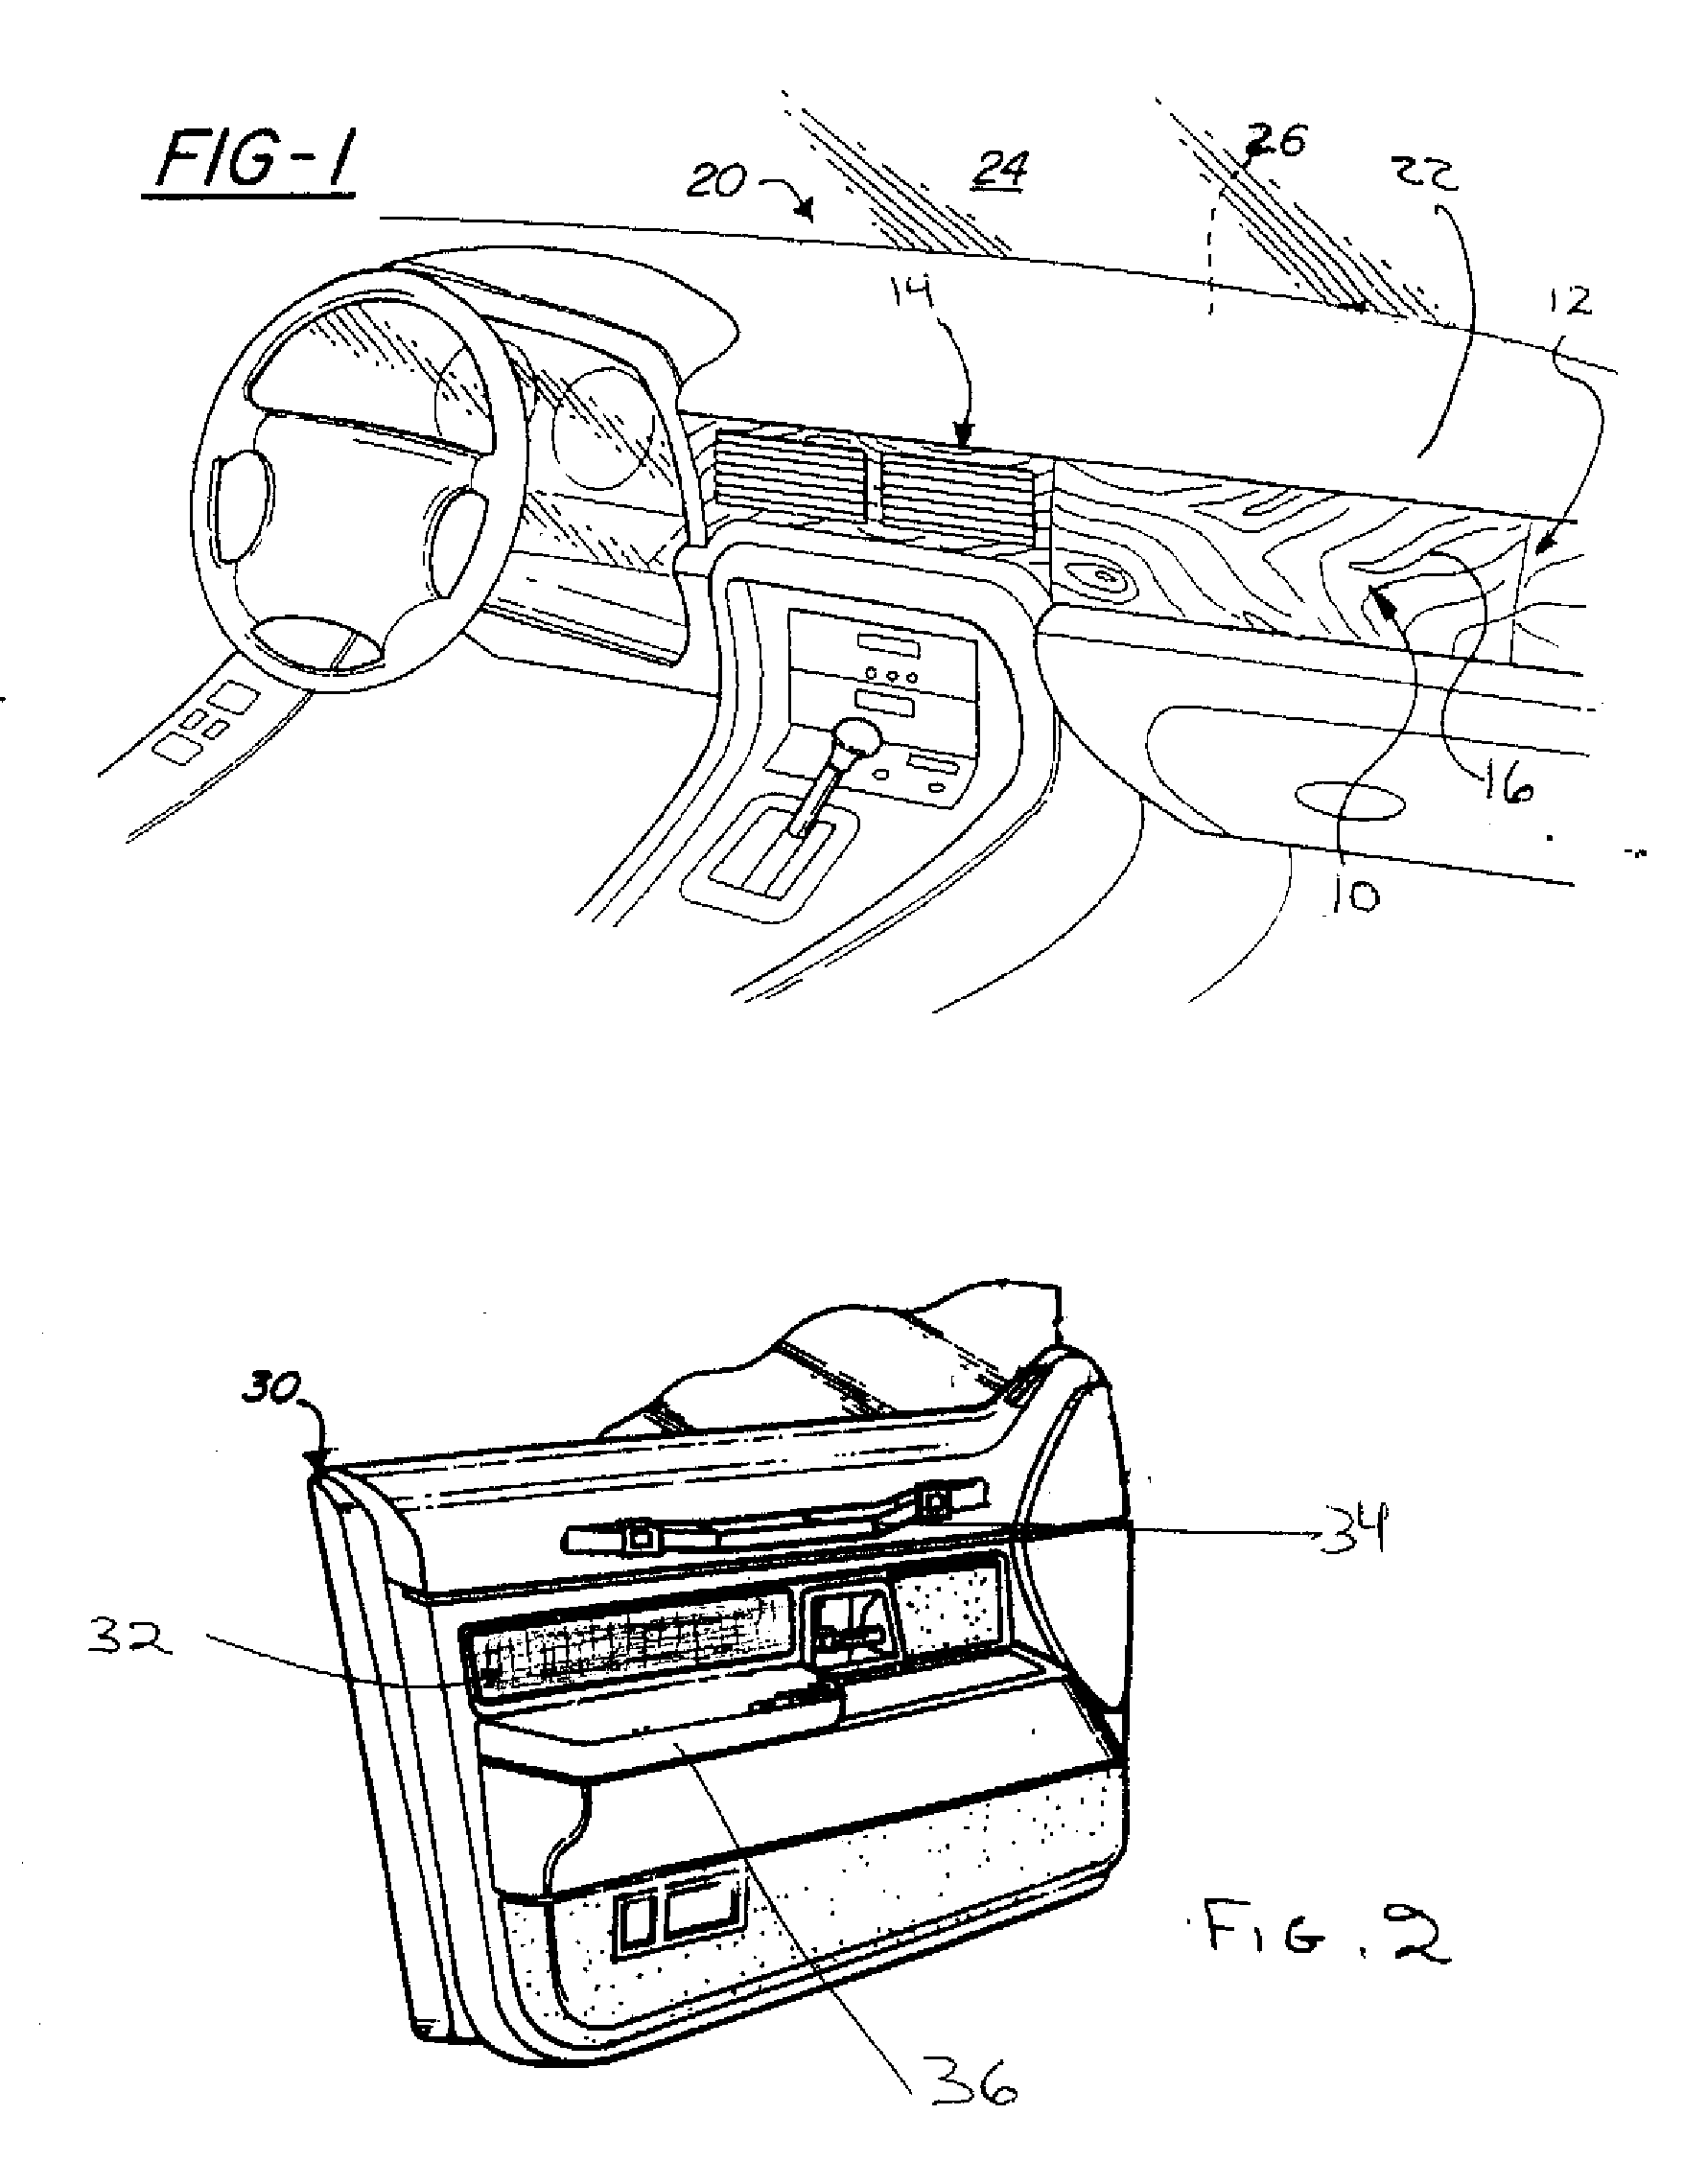 In-Mold Lamination Of A Decorative Product To A Primary Substrate